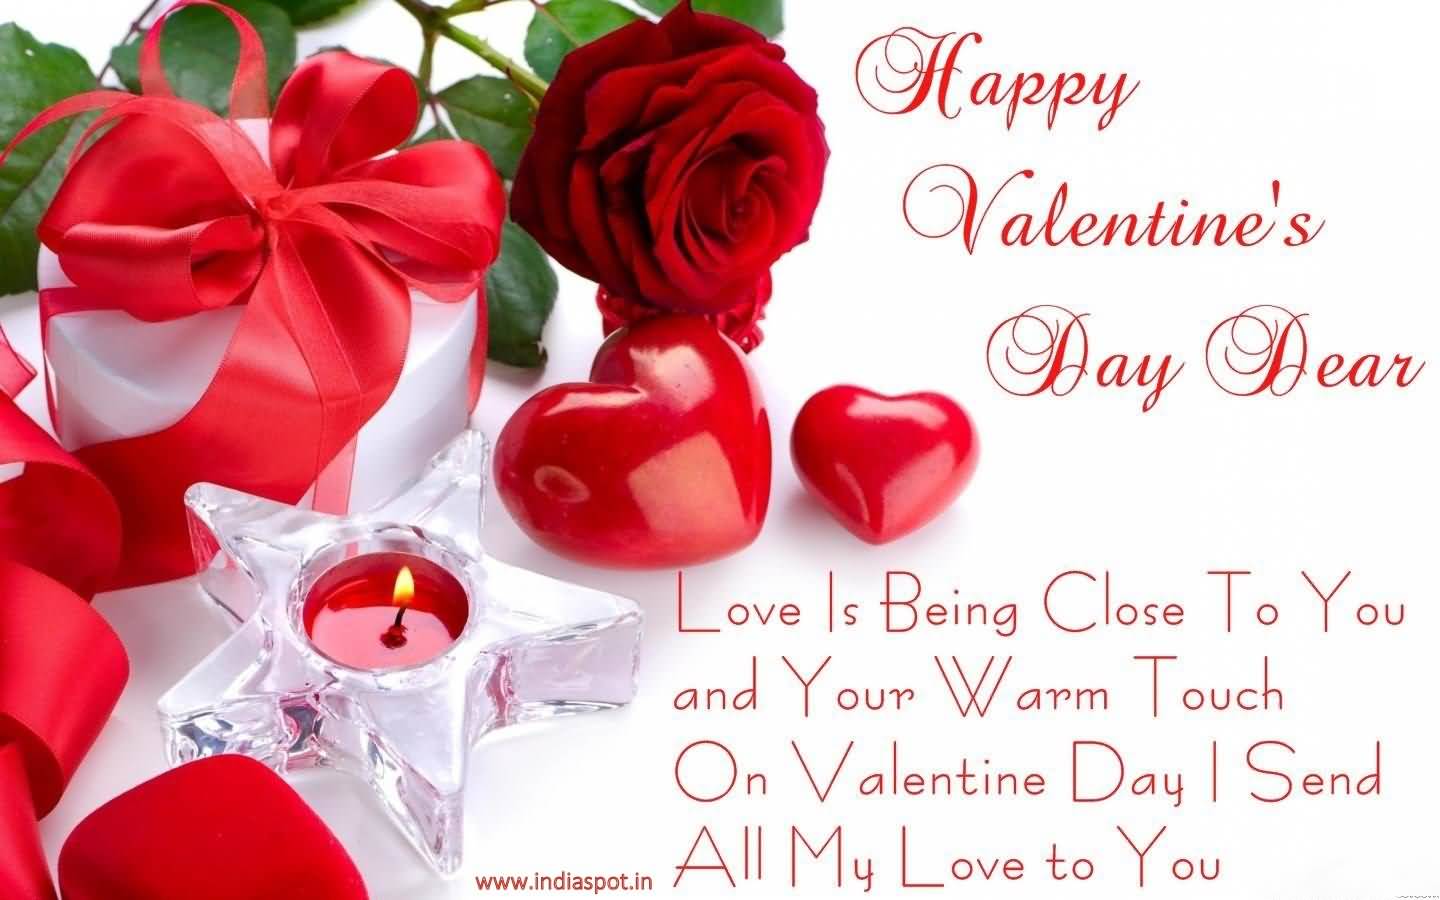 Happy Valentine's Day Dear Love Is Being Close To You And Your Warm Touch On Valentine Day I Send All My Love To You